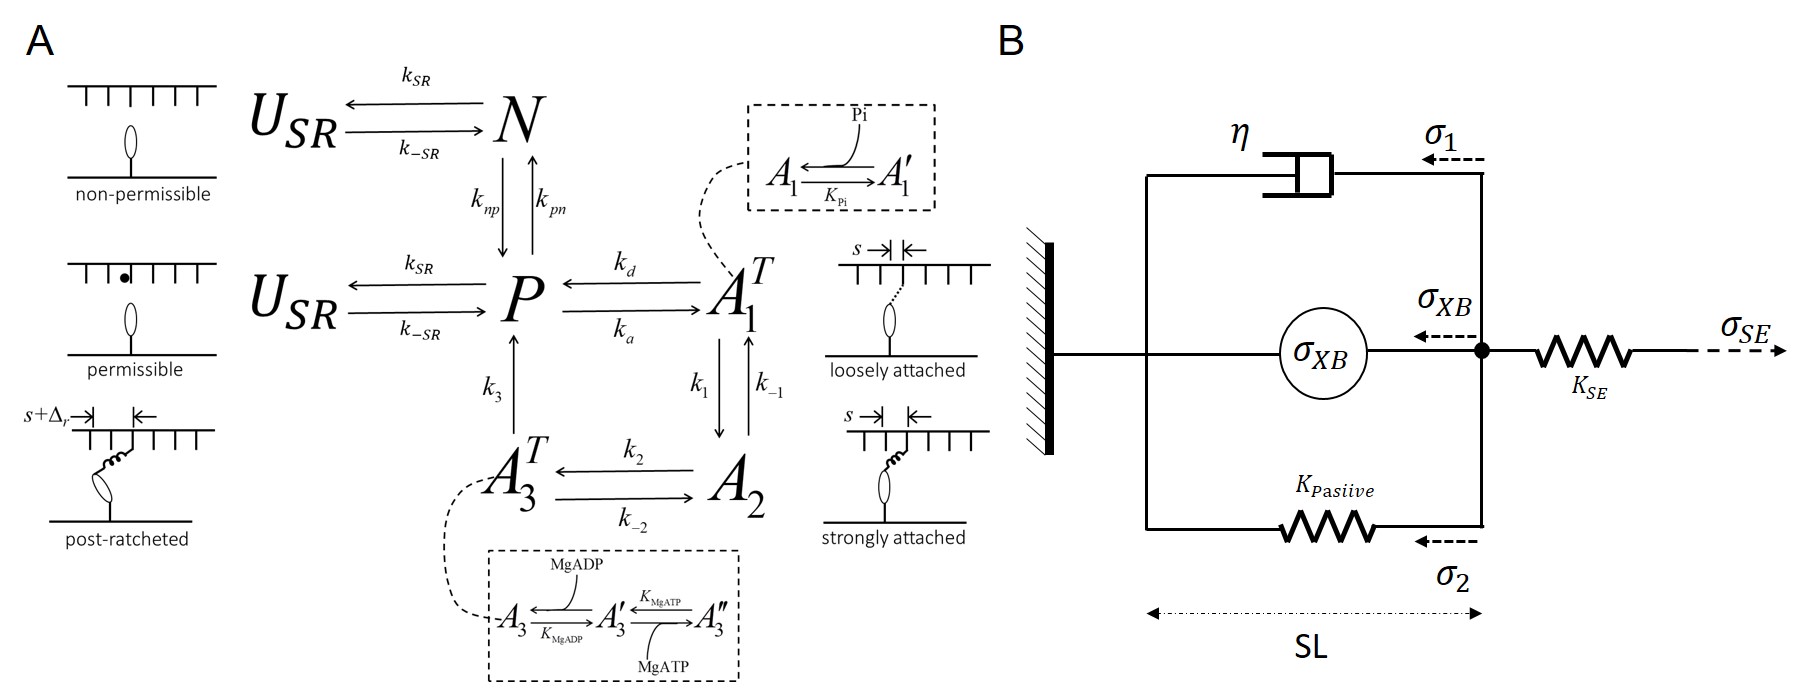 Cardiomyocyte mechanics model. The multi-scale strain-dependent model for the cross-bridge cycle is illustrated in panel A. The integration of the cross-bridge force (\sigma_{XB}) into a model of muscle mechanics is illustrated in panel B.